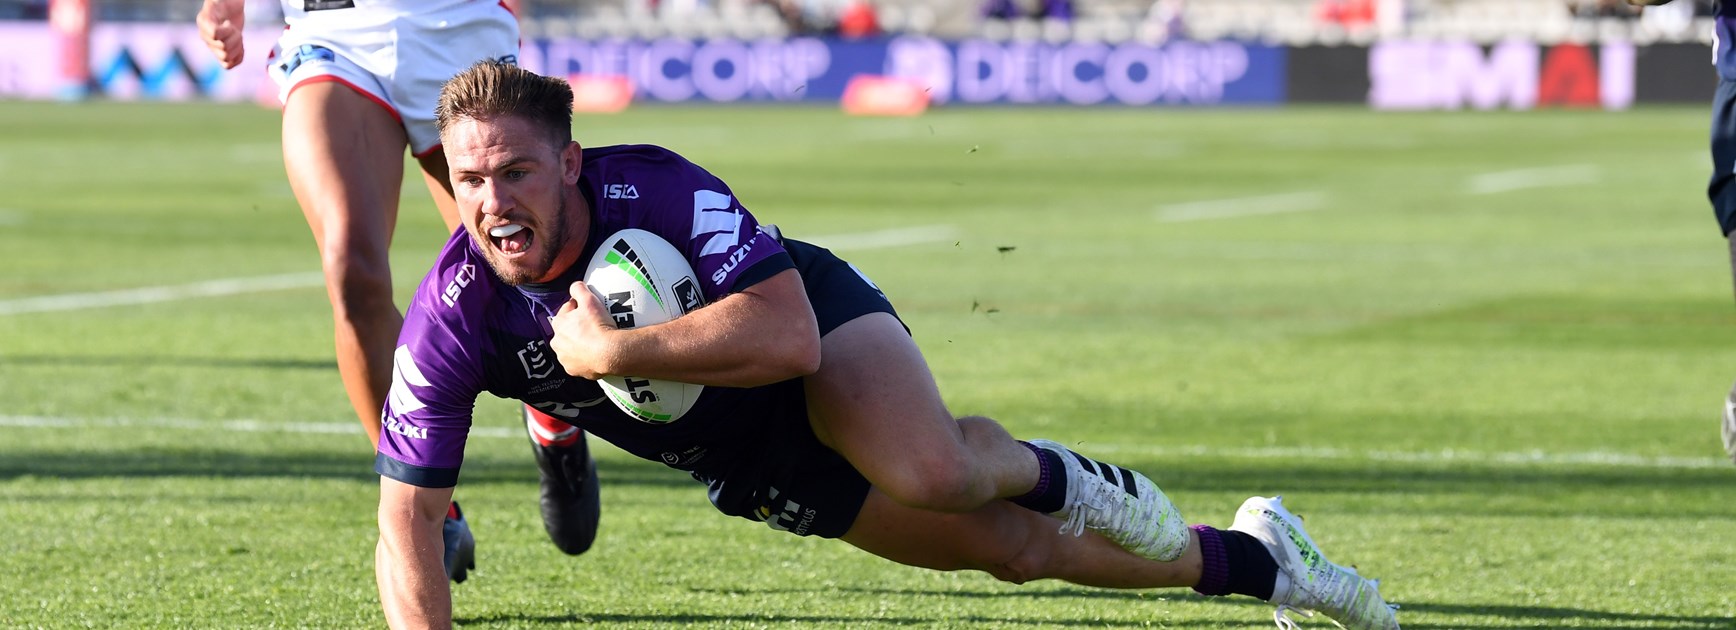 2020 Signings Tracker: Roberts exits Souths; Dogs nab Averillo